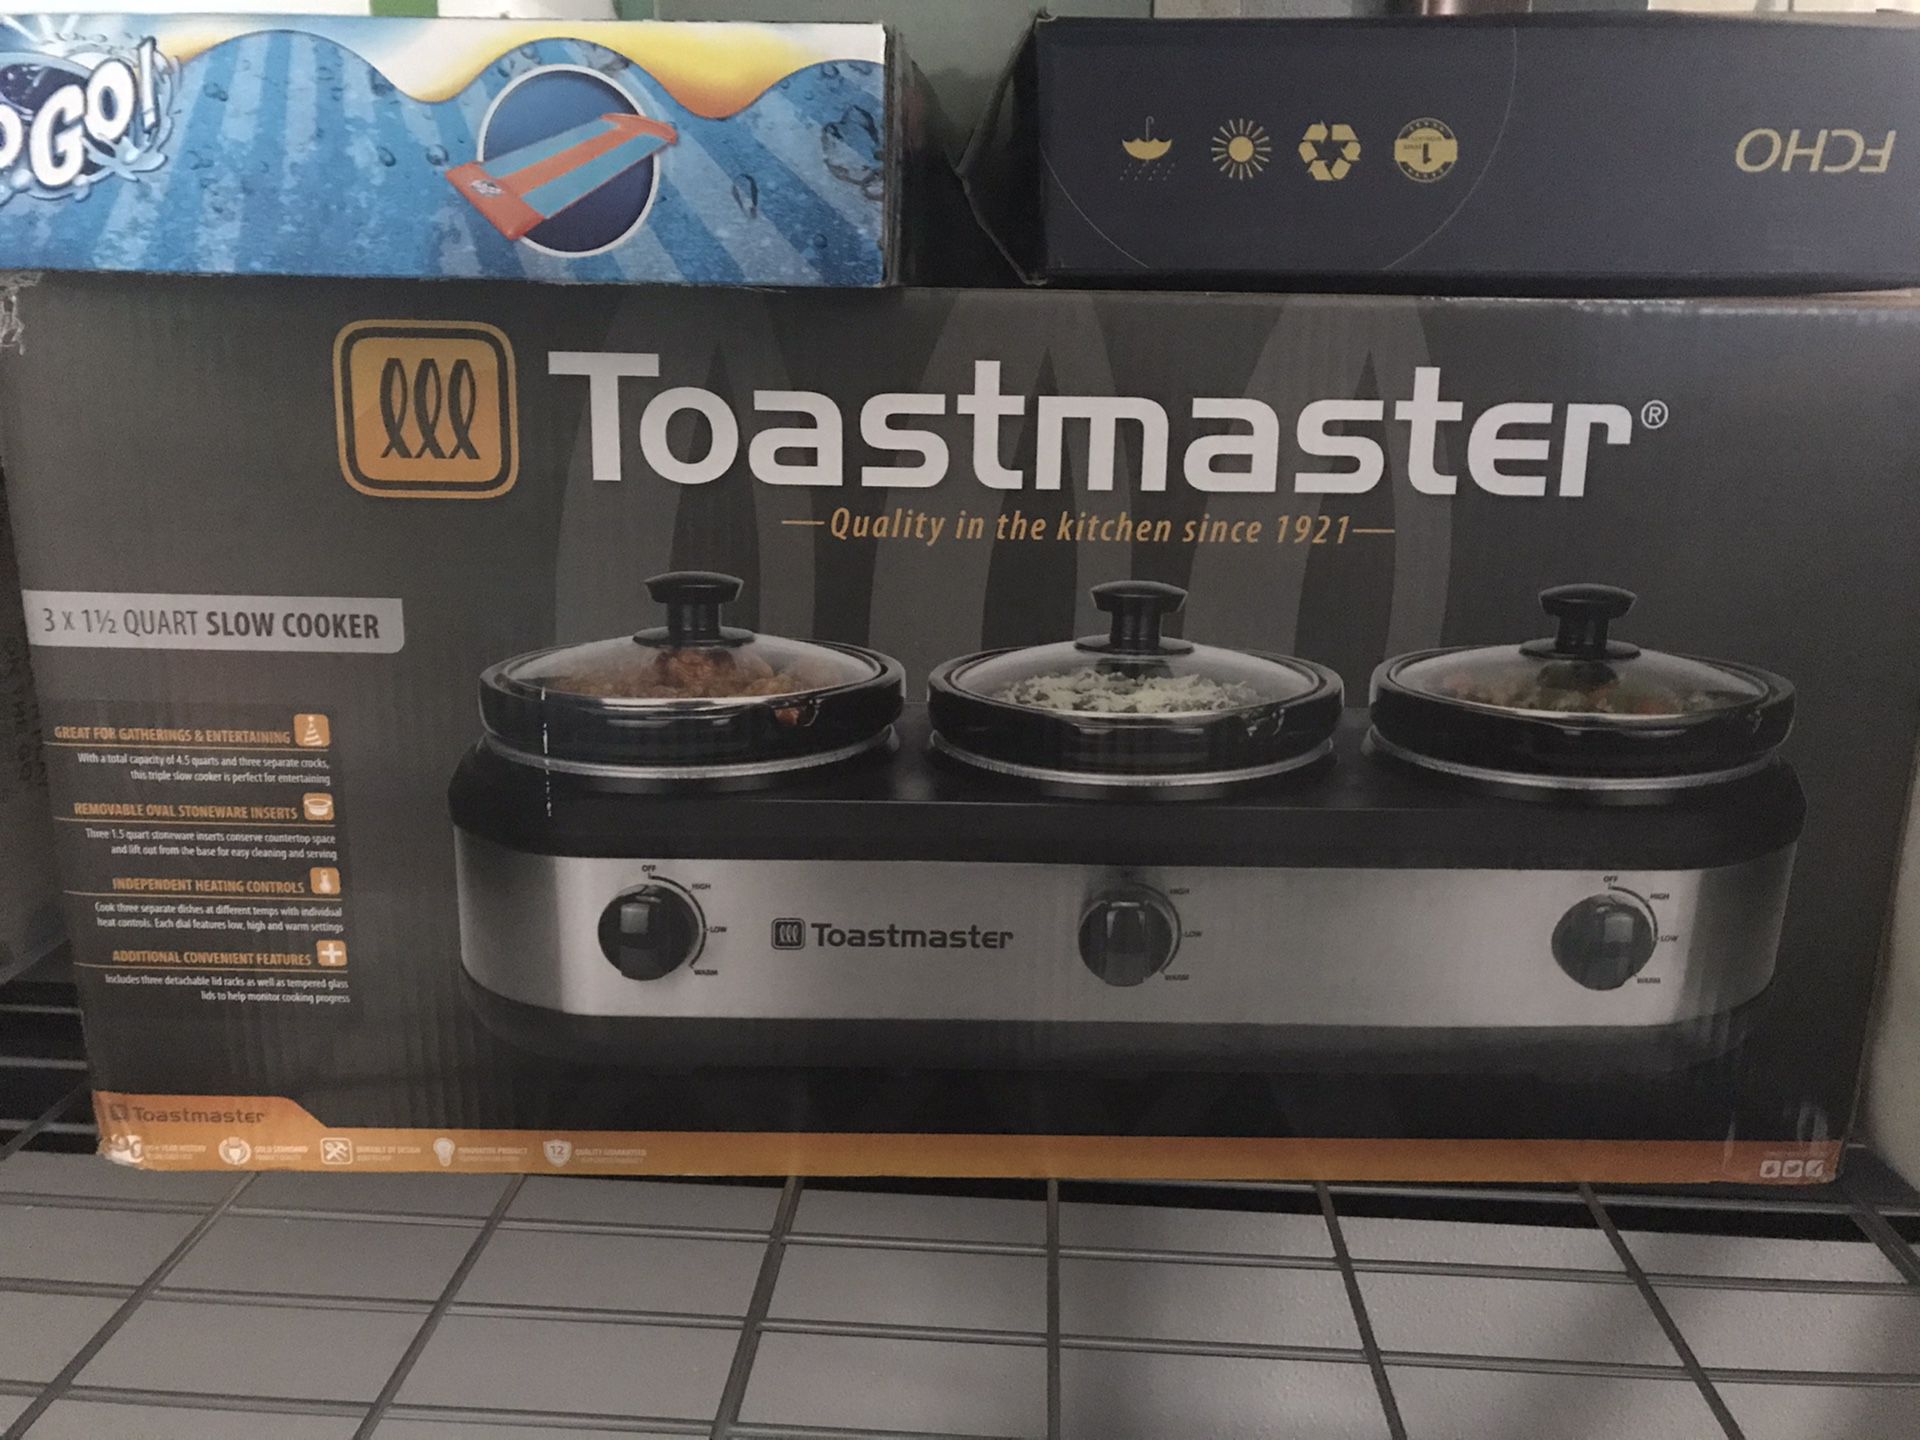 Toastmaster triple slow cookers